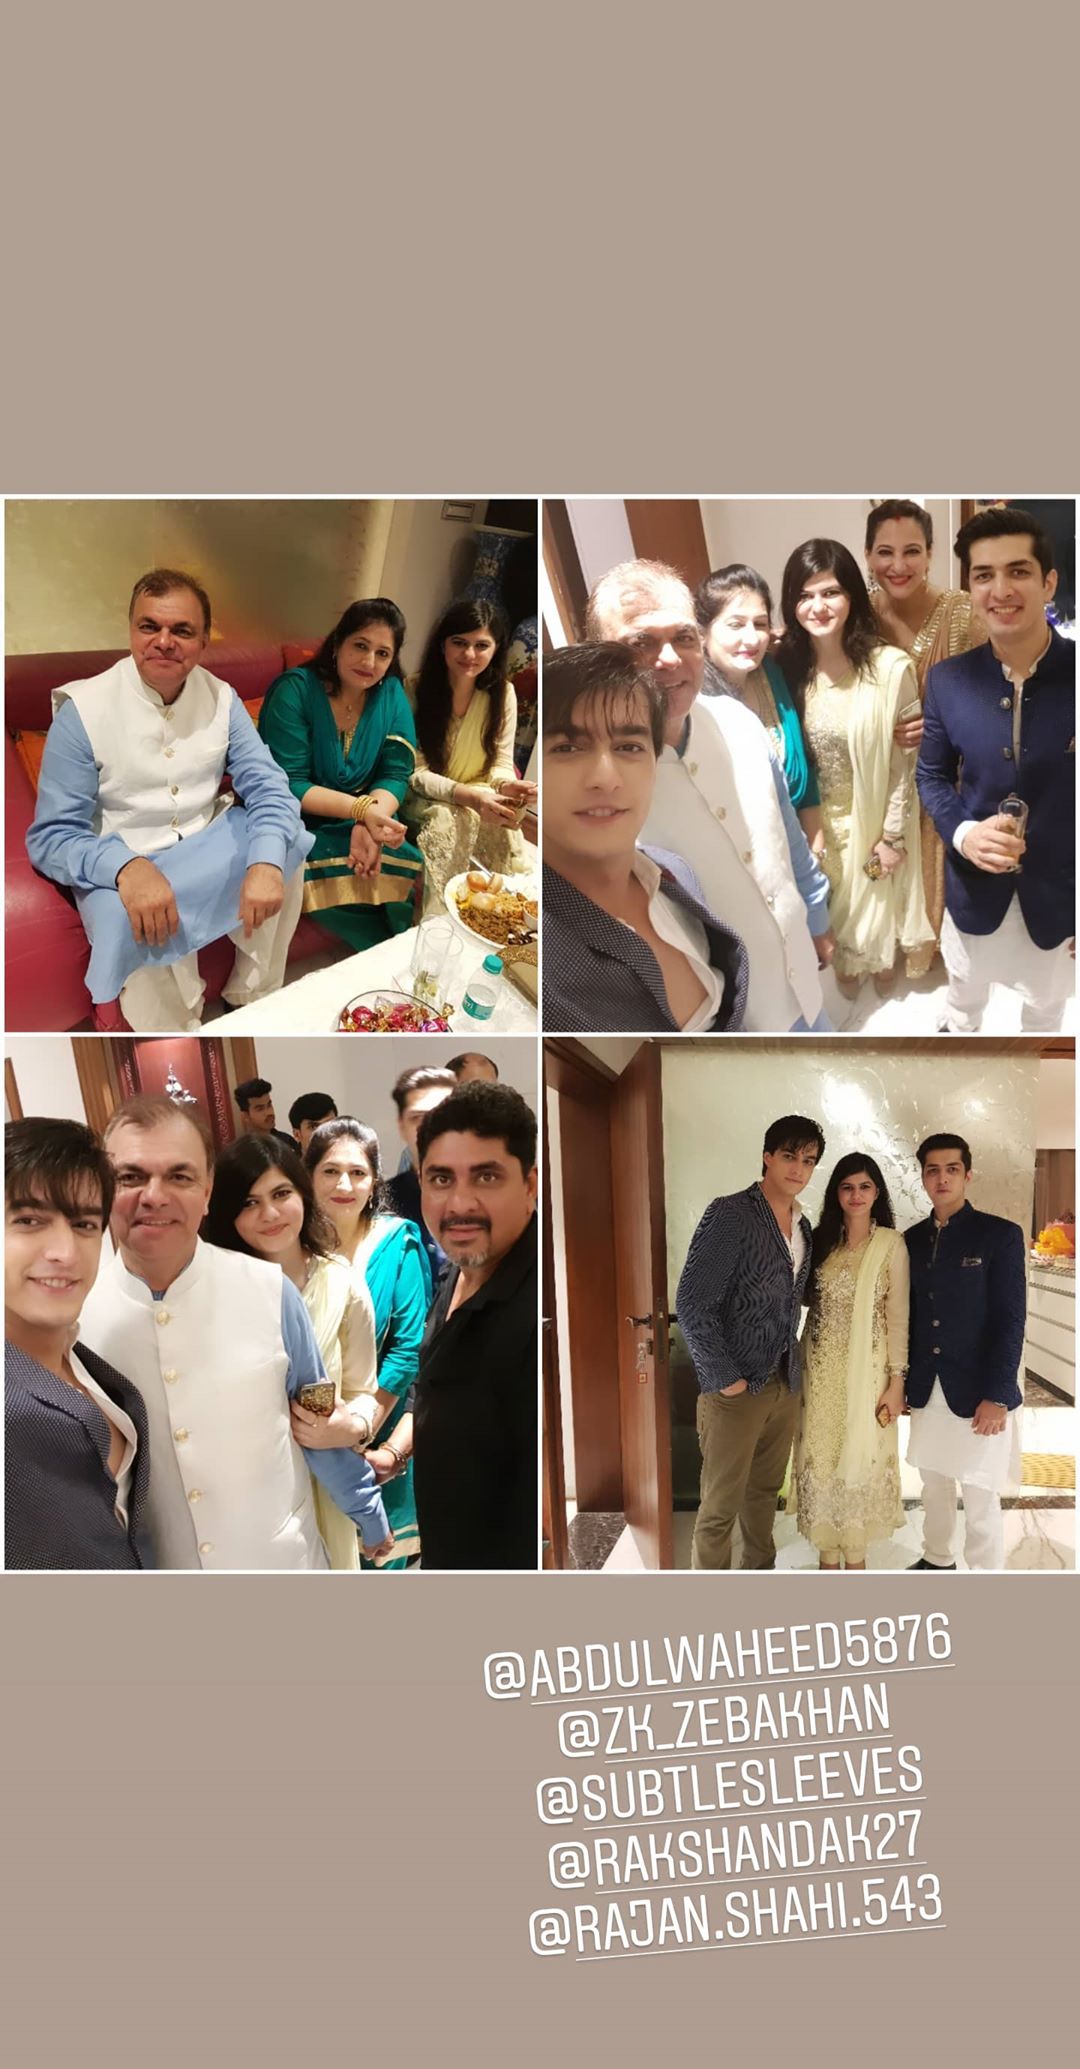 Yeh Rishta Kya Kehlata Hai actor Mohsin Khan's UNSEEN pictures with his family